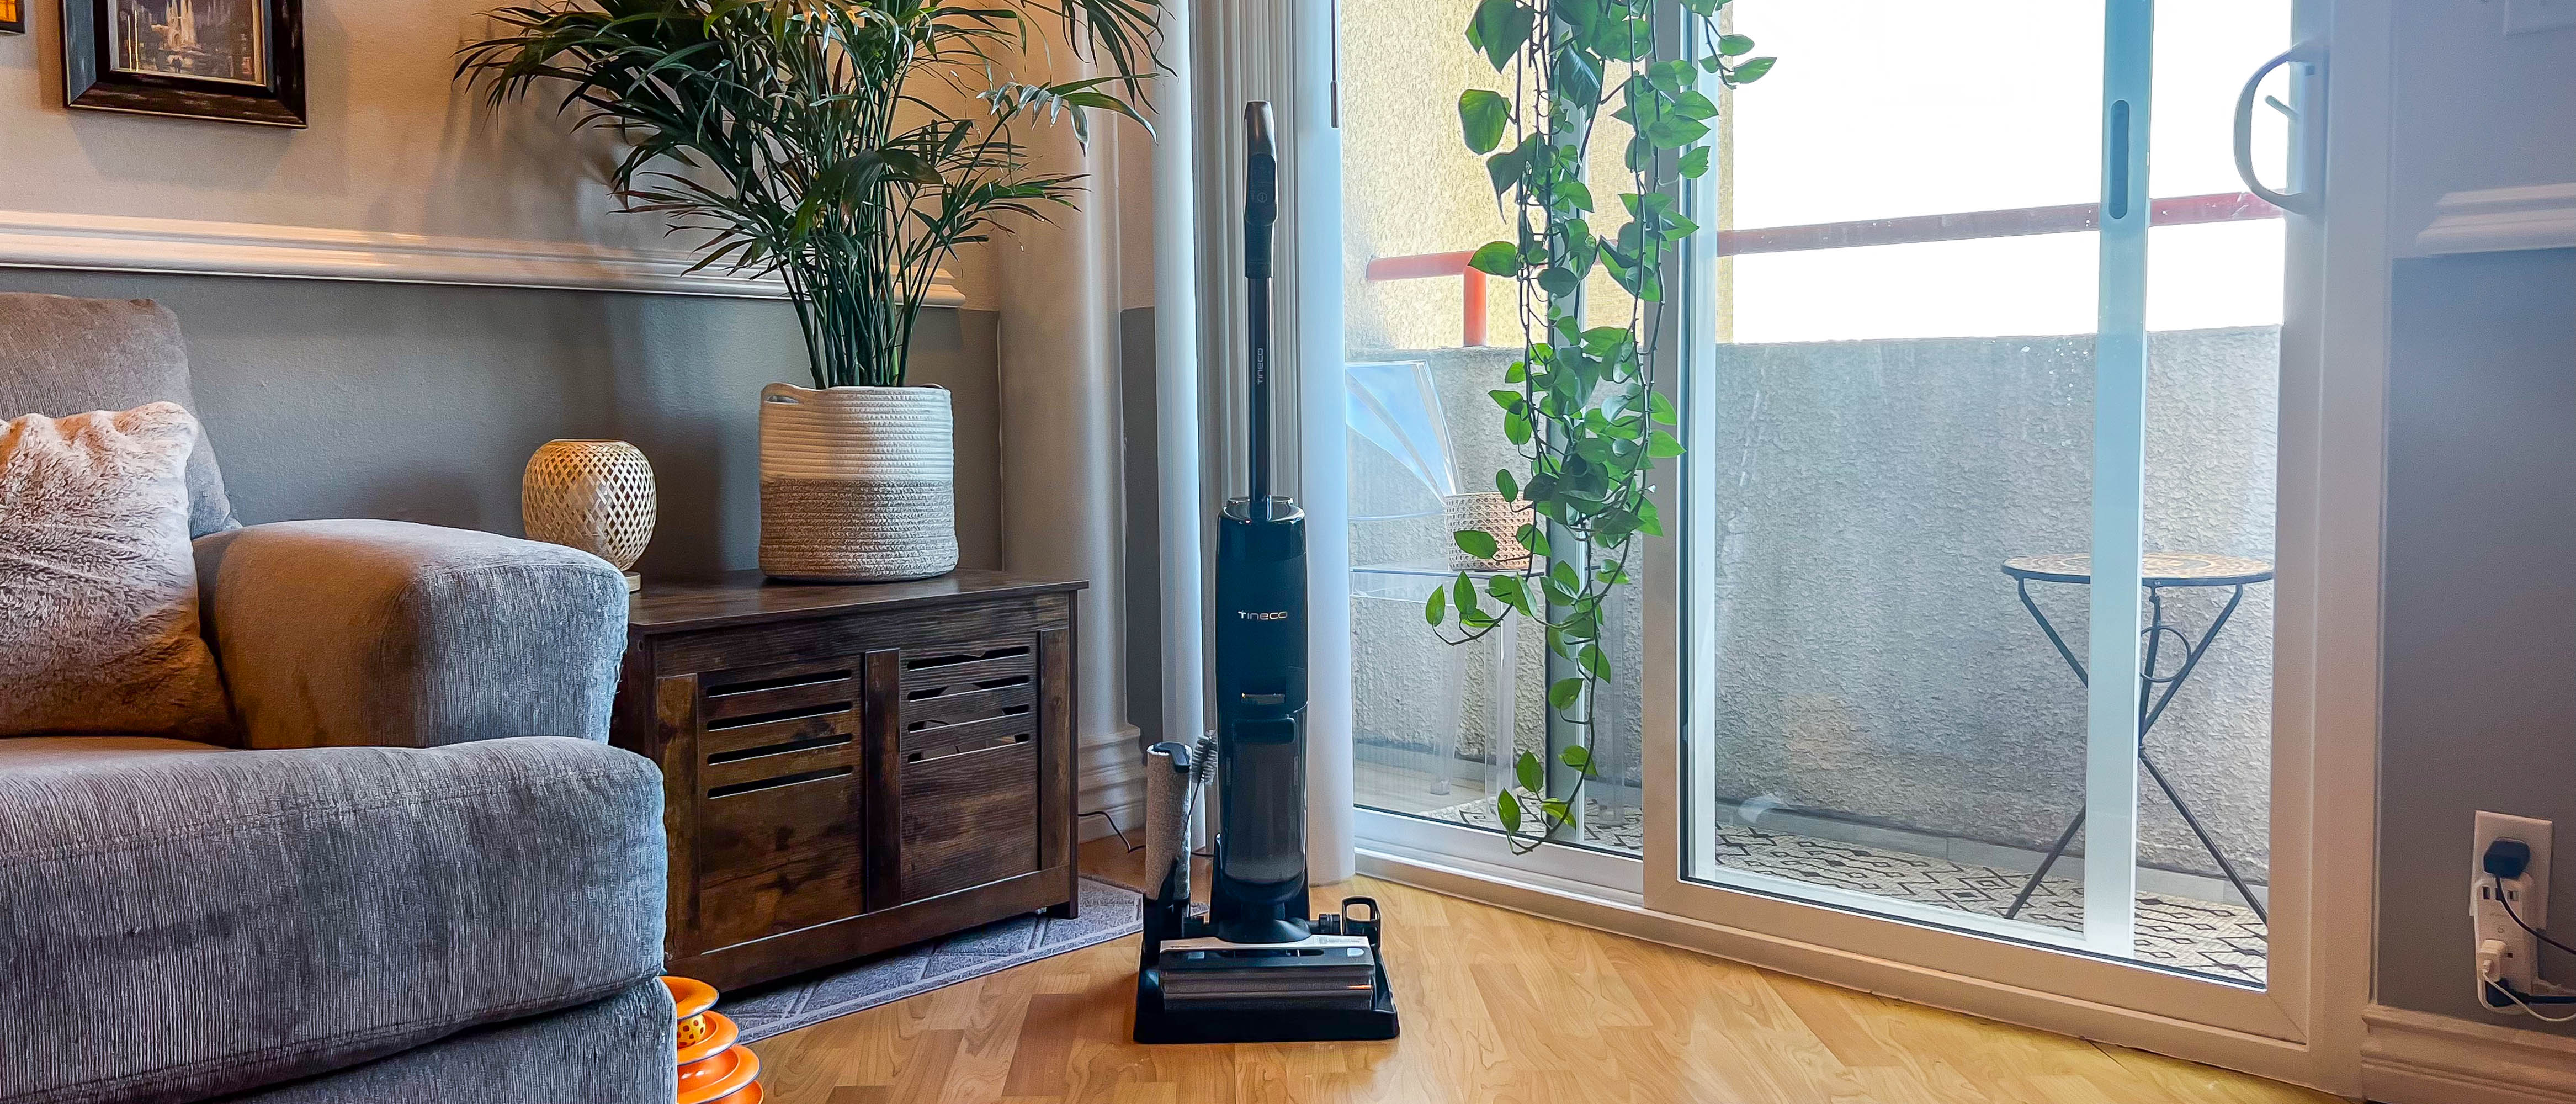 Tineco Floor One S7 Pro Review: Ultimate Hand-held Vacuum